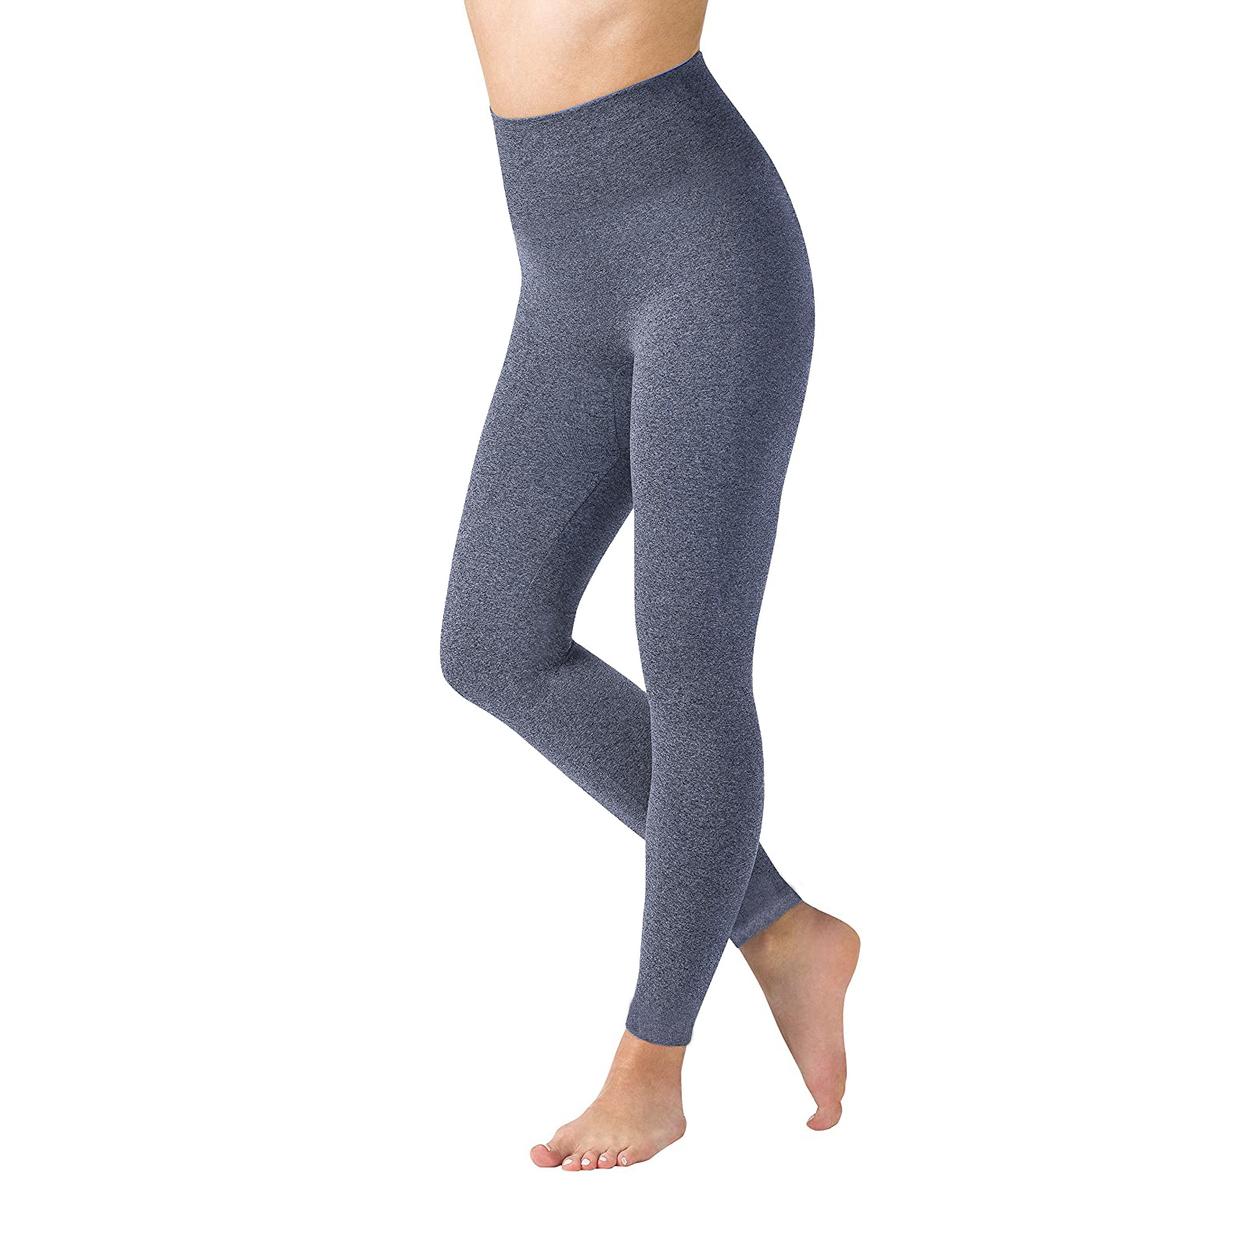 Multi-Pack: Women's High Waisted Ultra-Soft Fleece Lined Warm Marled Leggings(Available In Plus Sizes) - 2-pack, Charcoal & Charcoal, Small